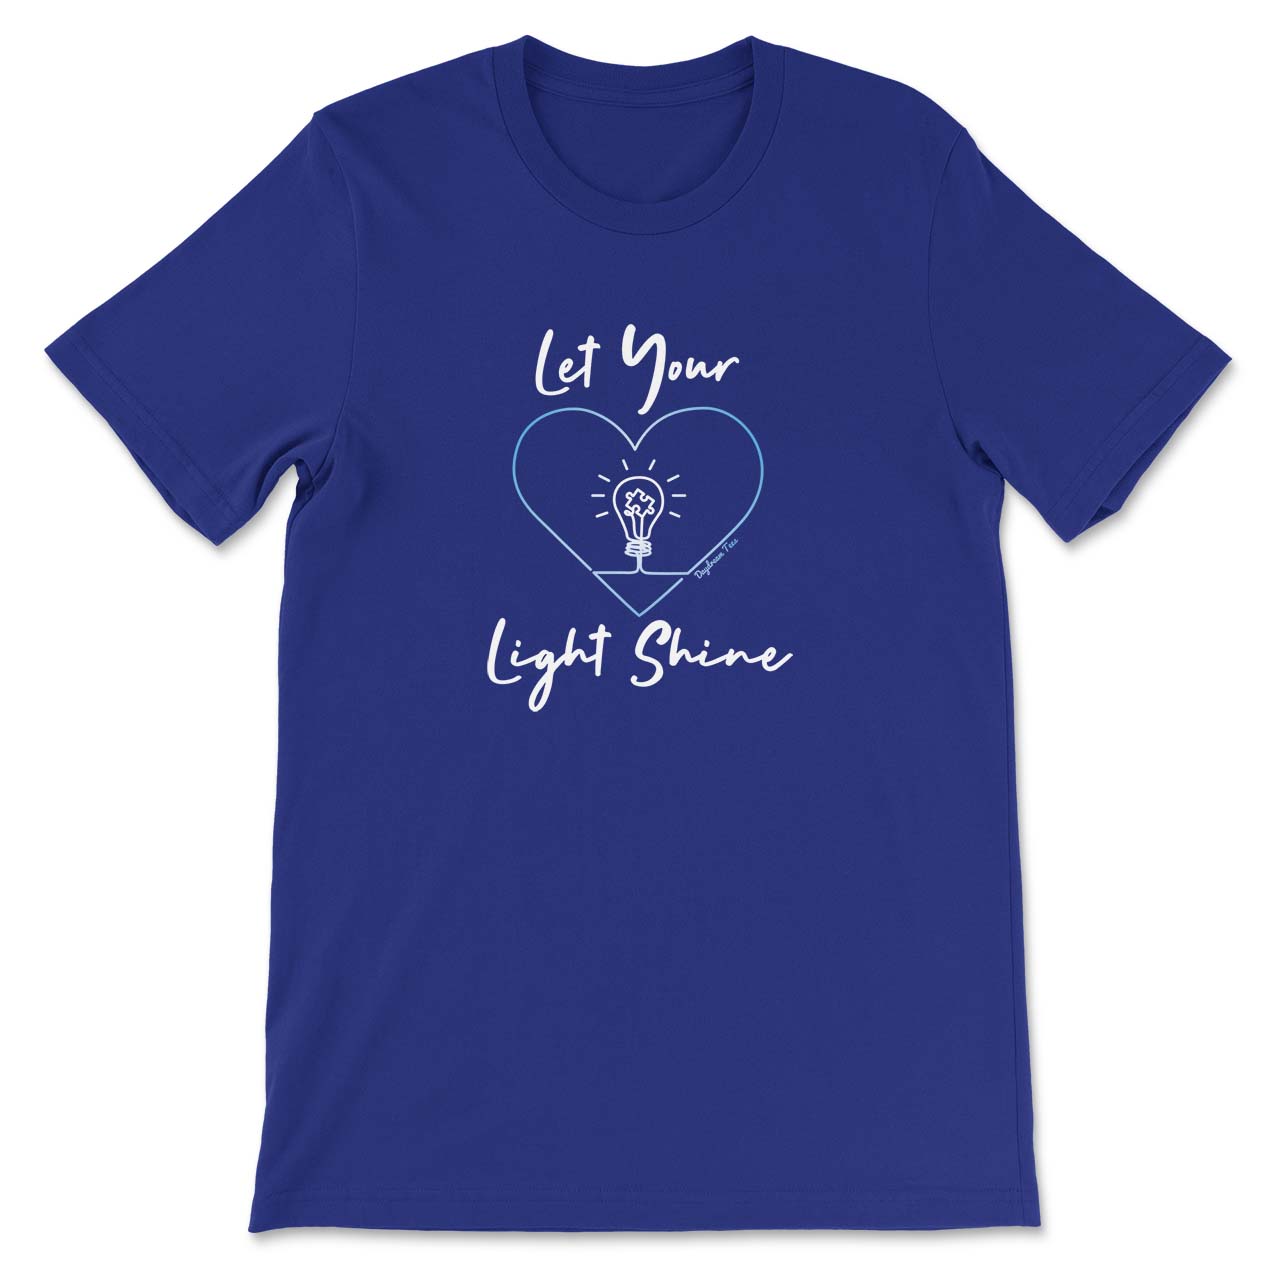 Daydream Tees Let Your Light Shine